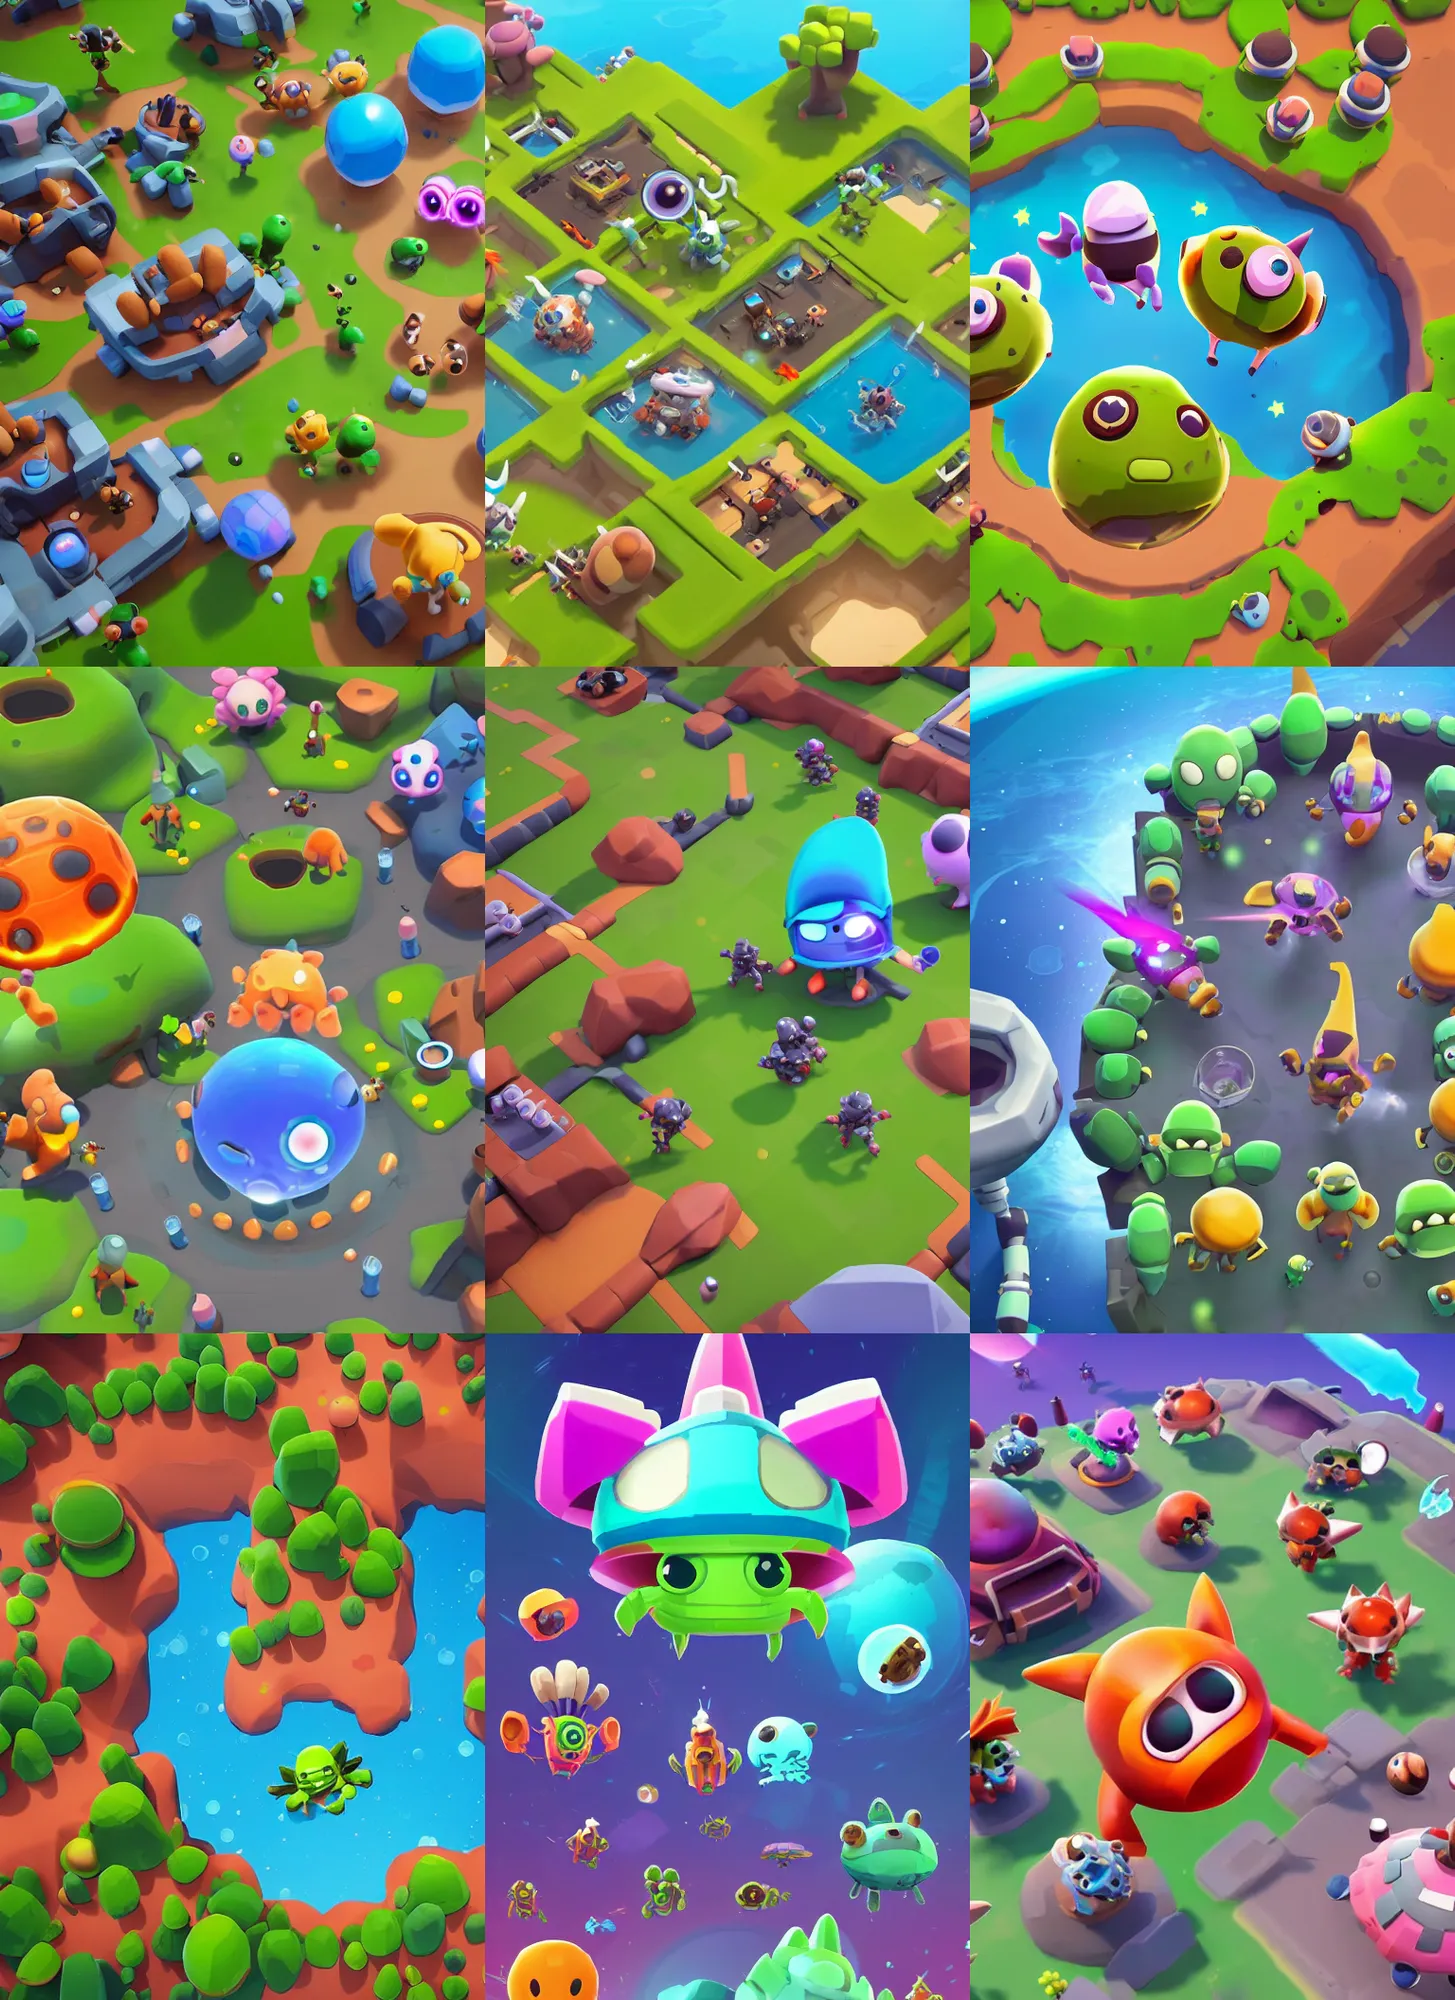 Prompt: mobile battle royale about alien cute little animals that land on a planet with different biomes meteorites or alien capsules, in the visual style of Brawl Stars and Spore, view from above and slightly behind